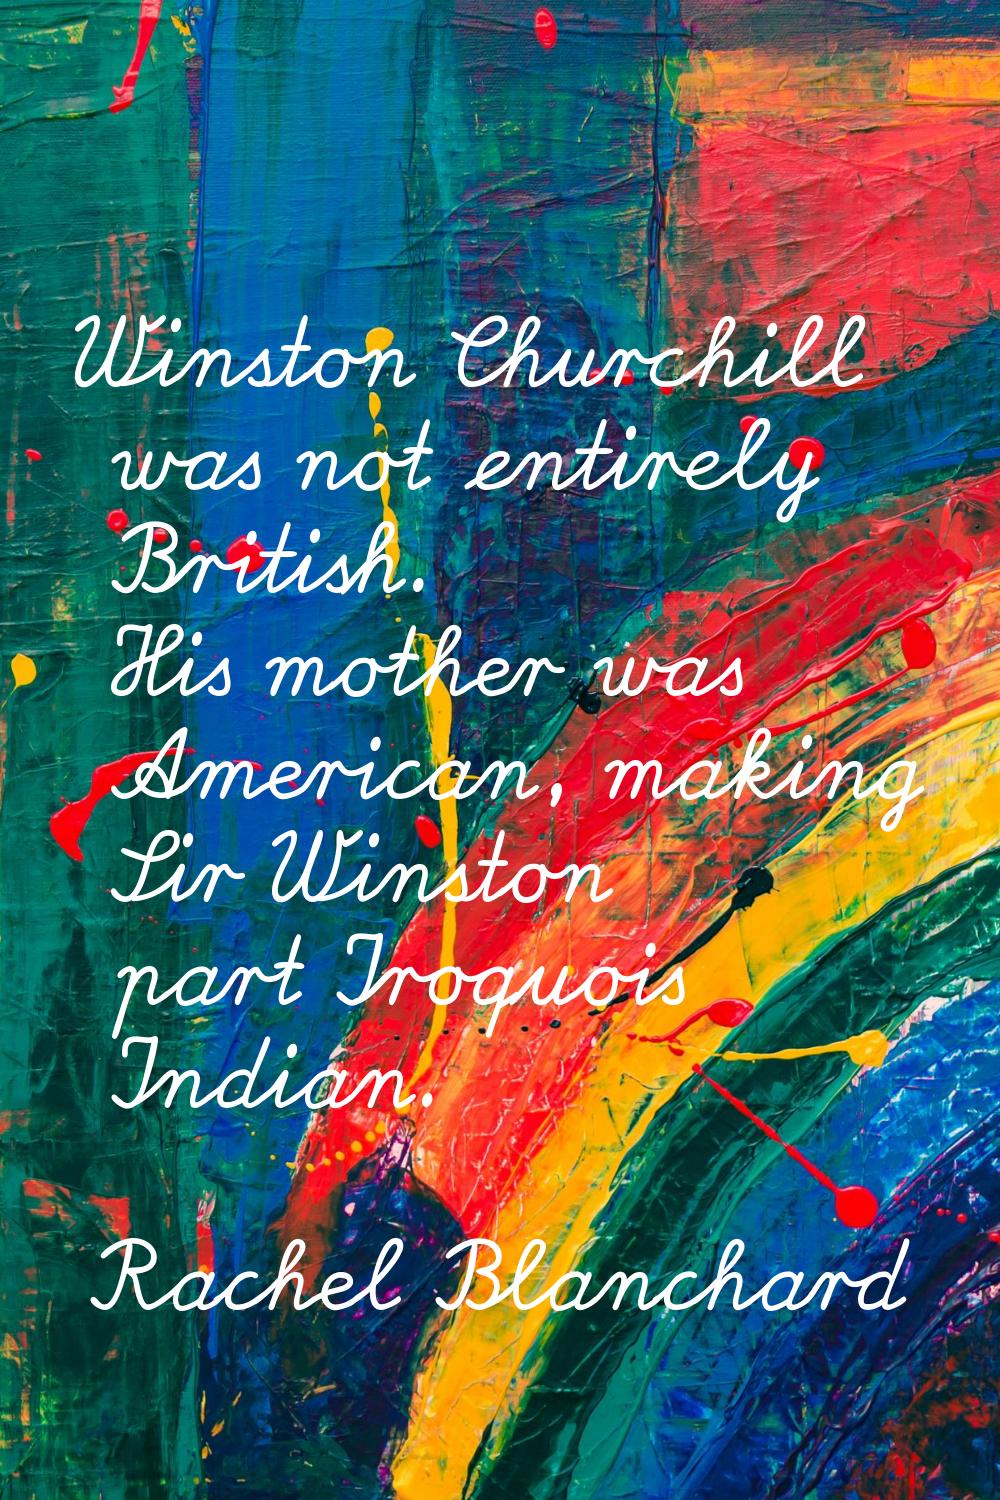 Winston Churchill was not entirely British. His mother was American, making Sir Winston part Iroquo